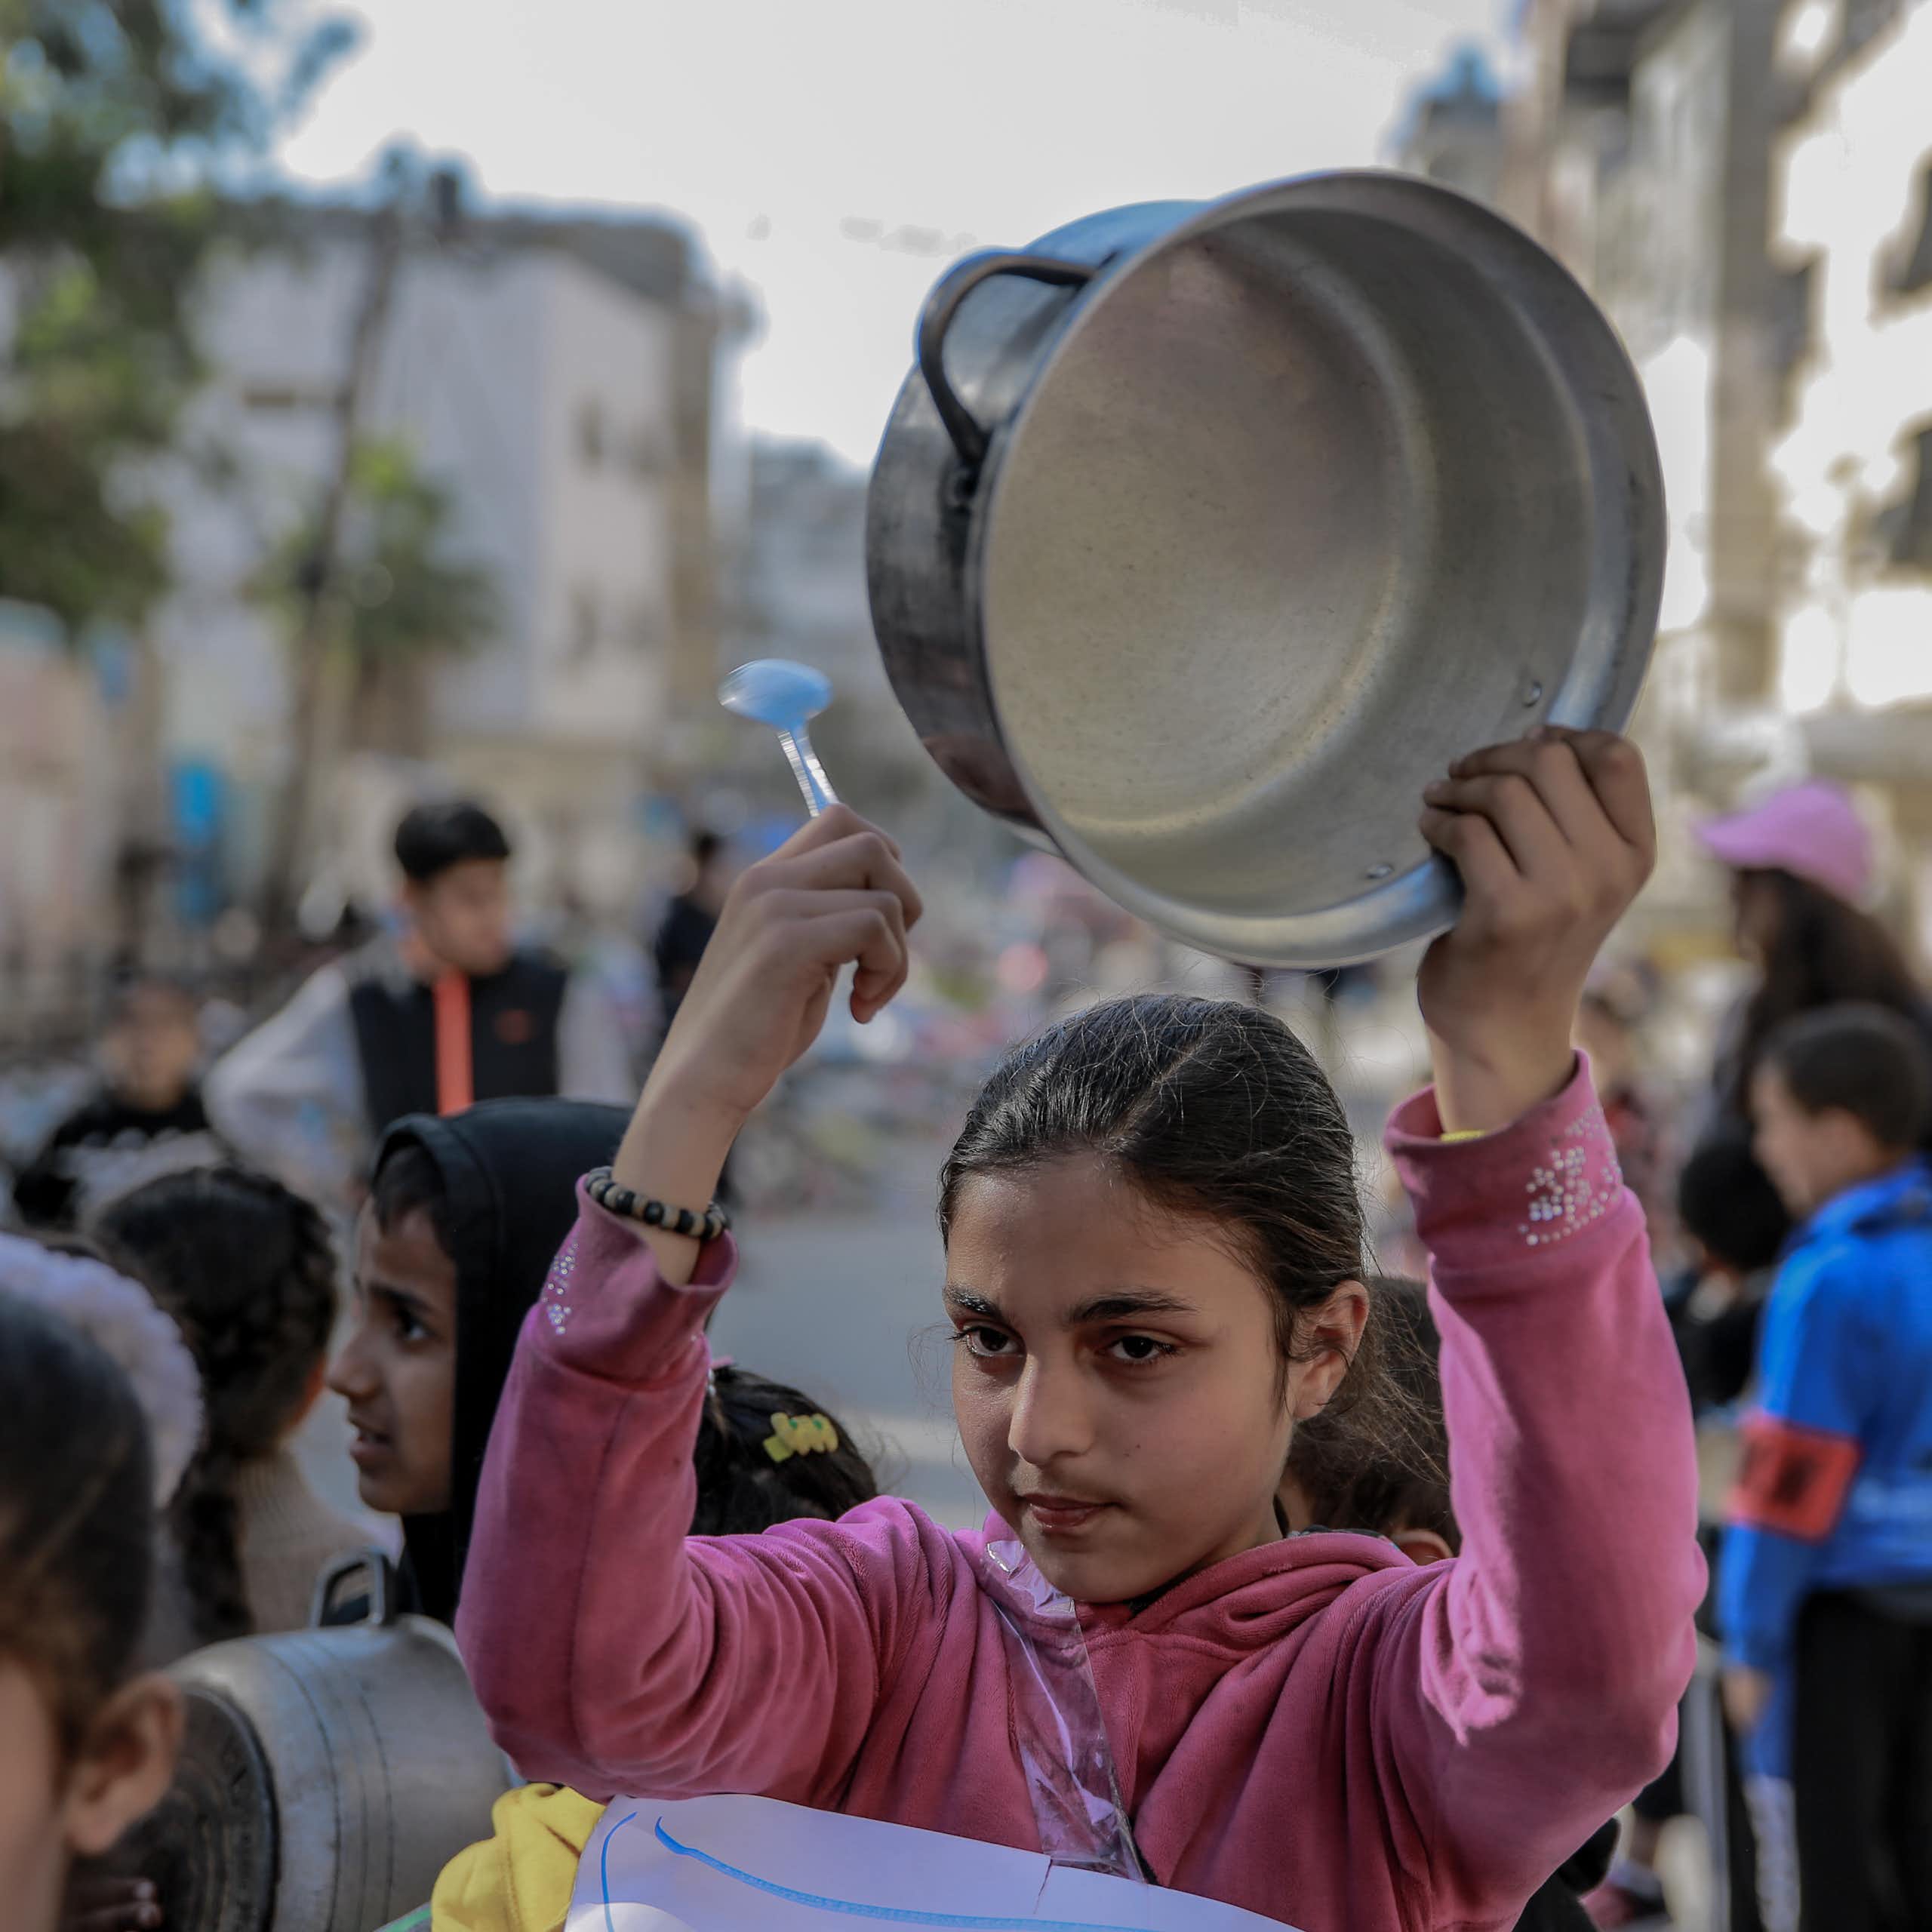 A girl in a pink top holds an empty cooking pot over her head.